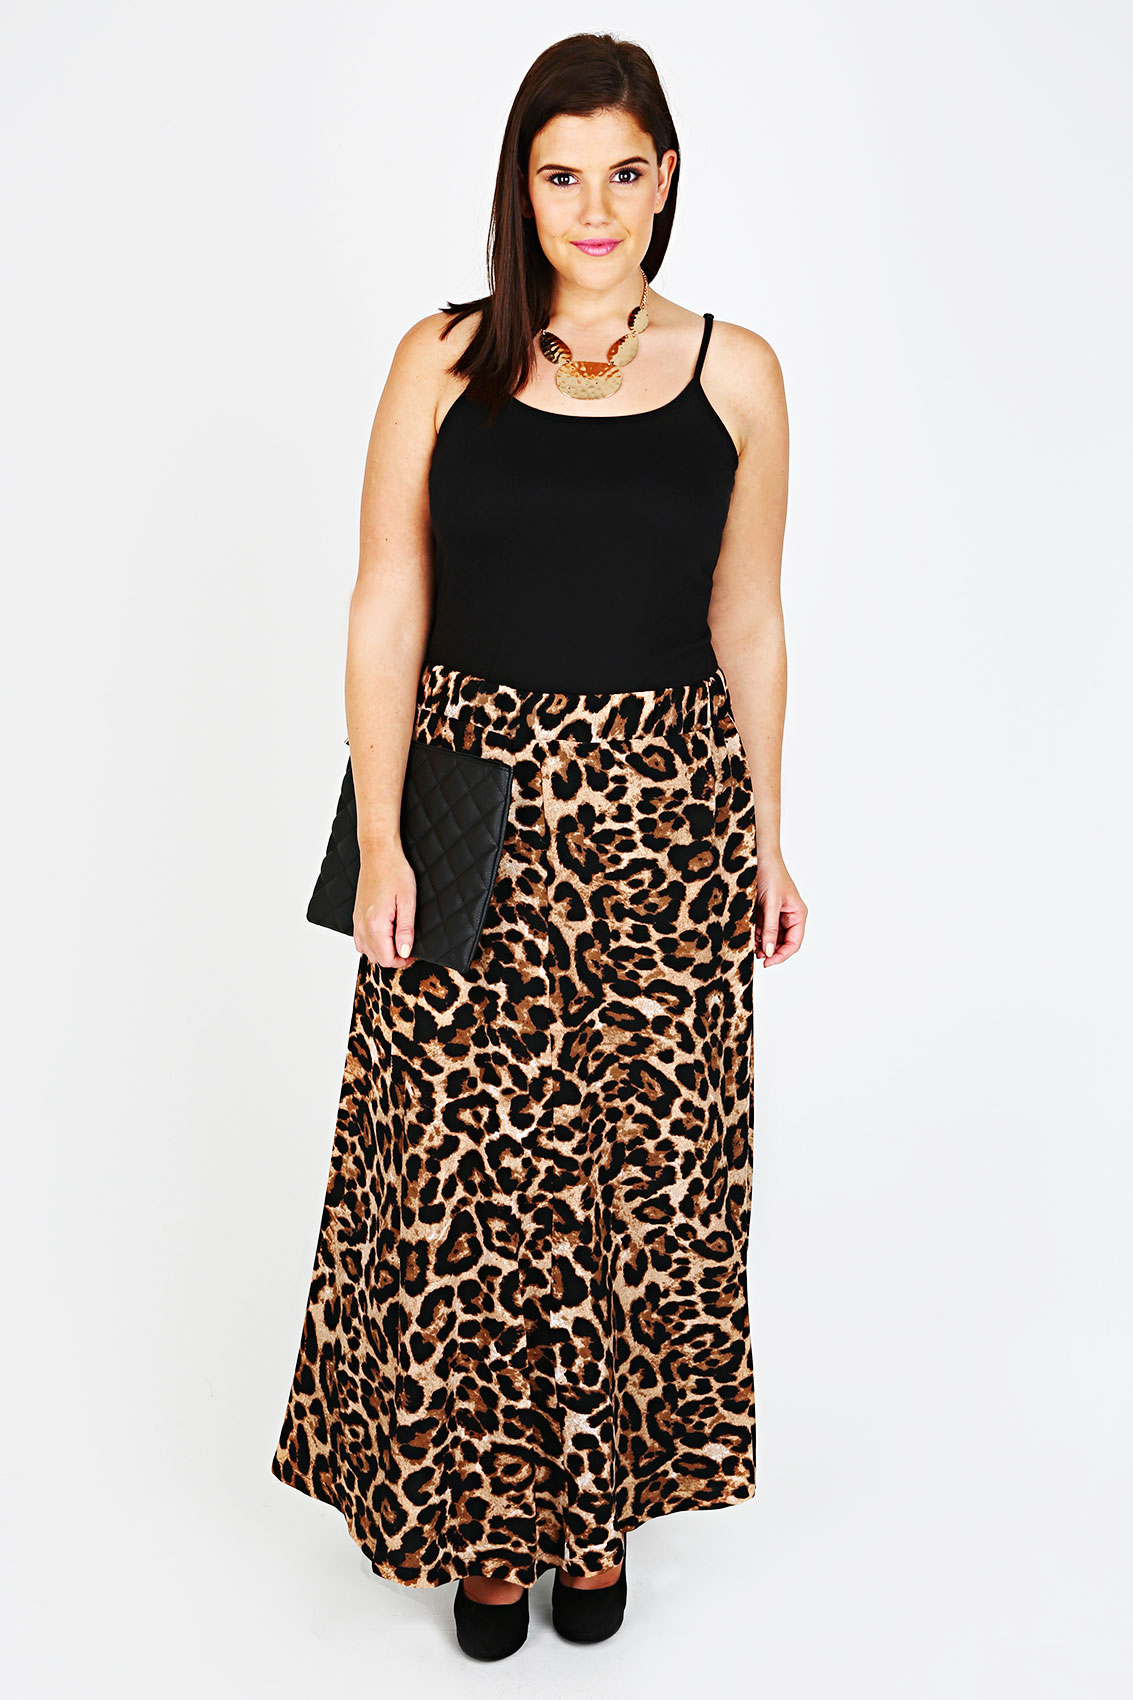 Leopard Print Maxi Skirt With Panel Detail Plus size 16,18,20,22,24,26,28,30,32